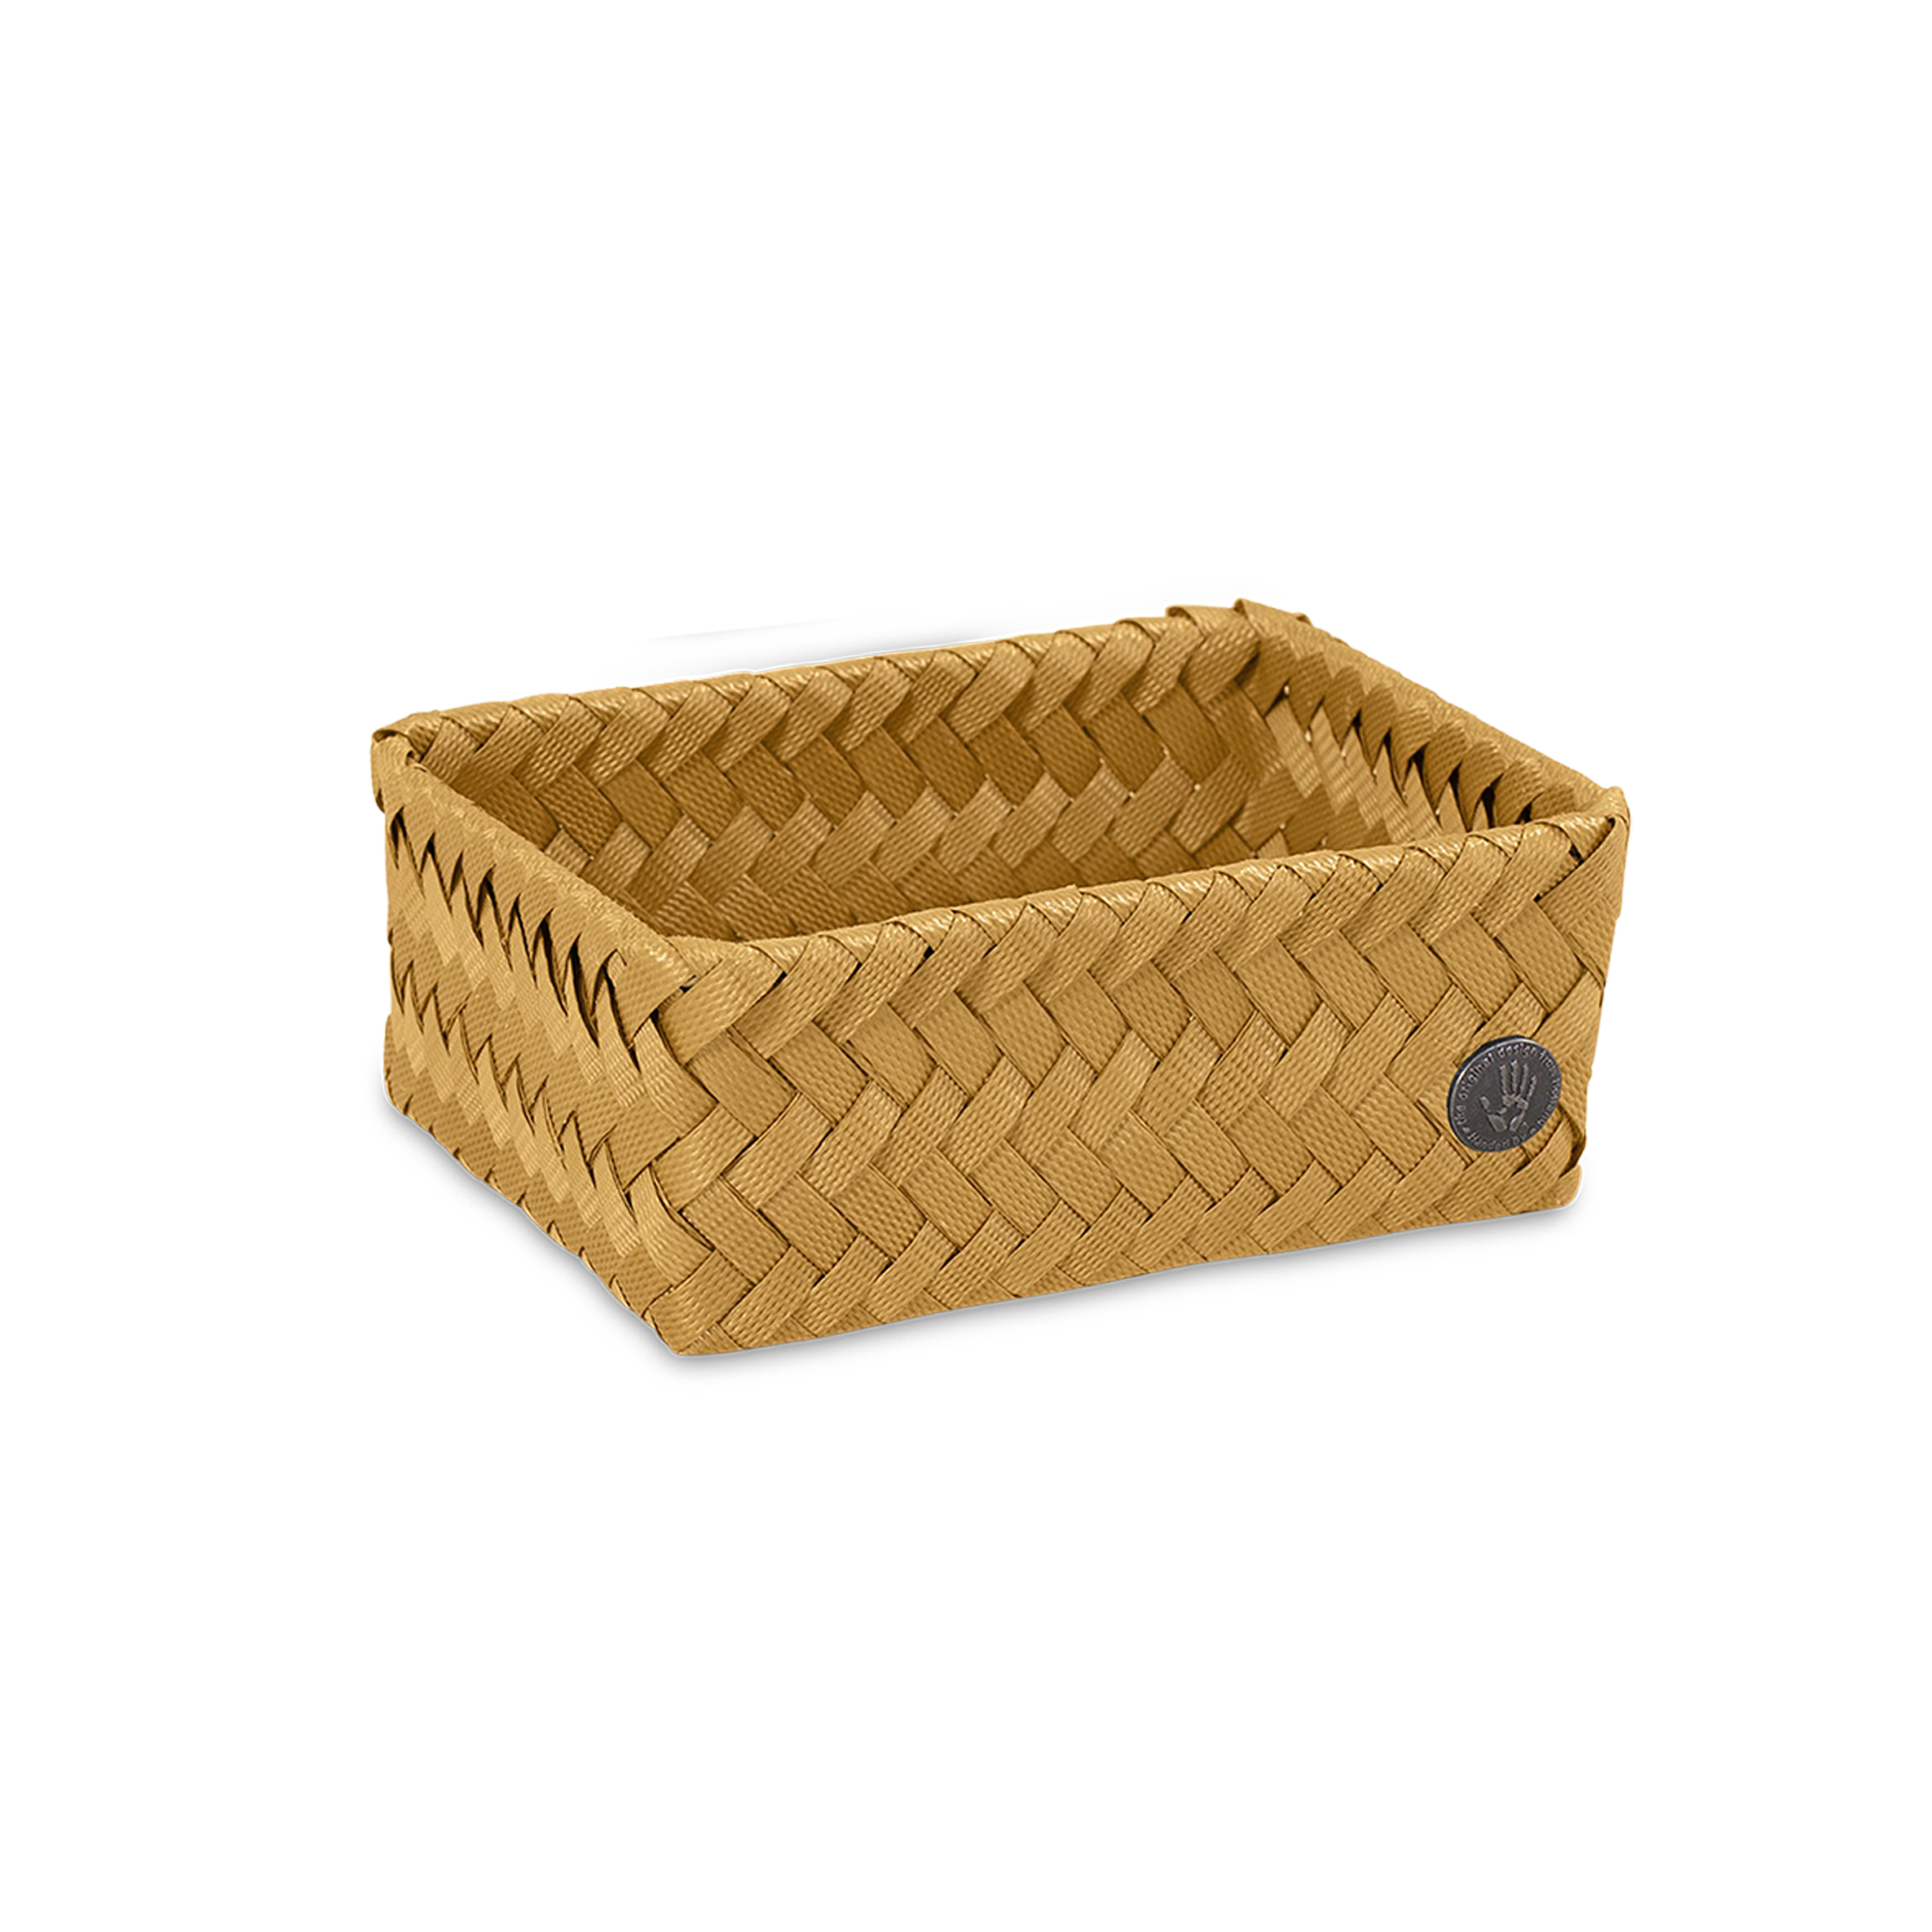 Basket FIT HANDED BY FIT-1444